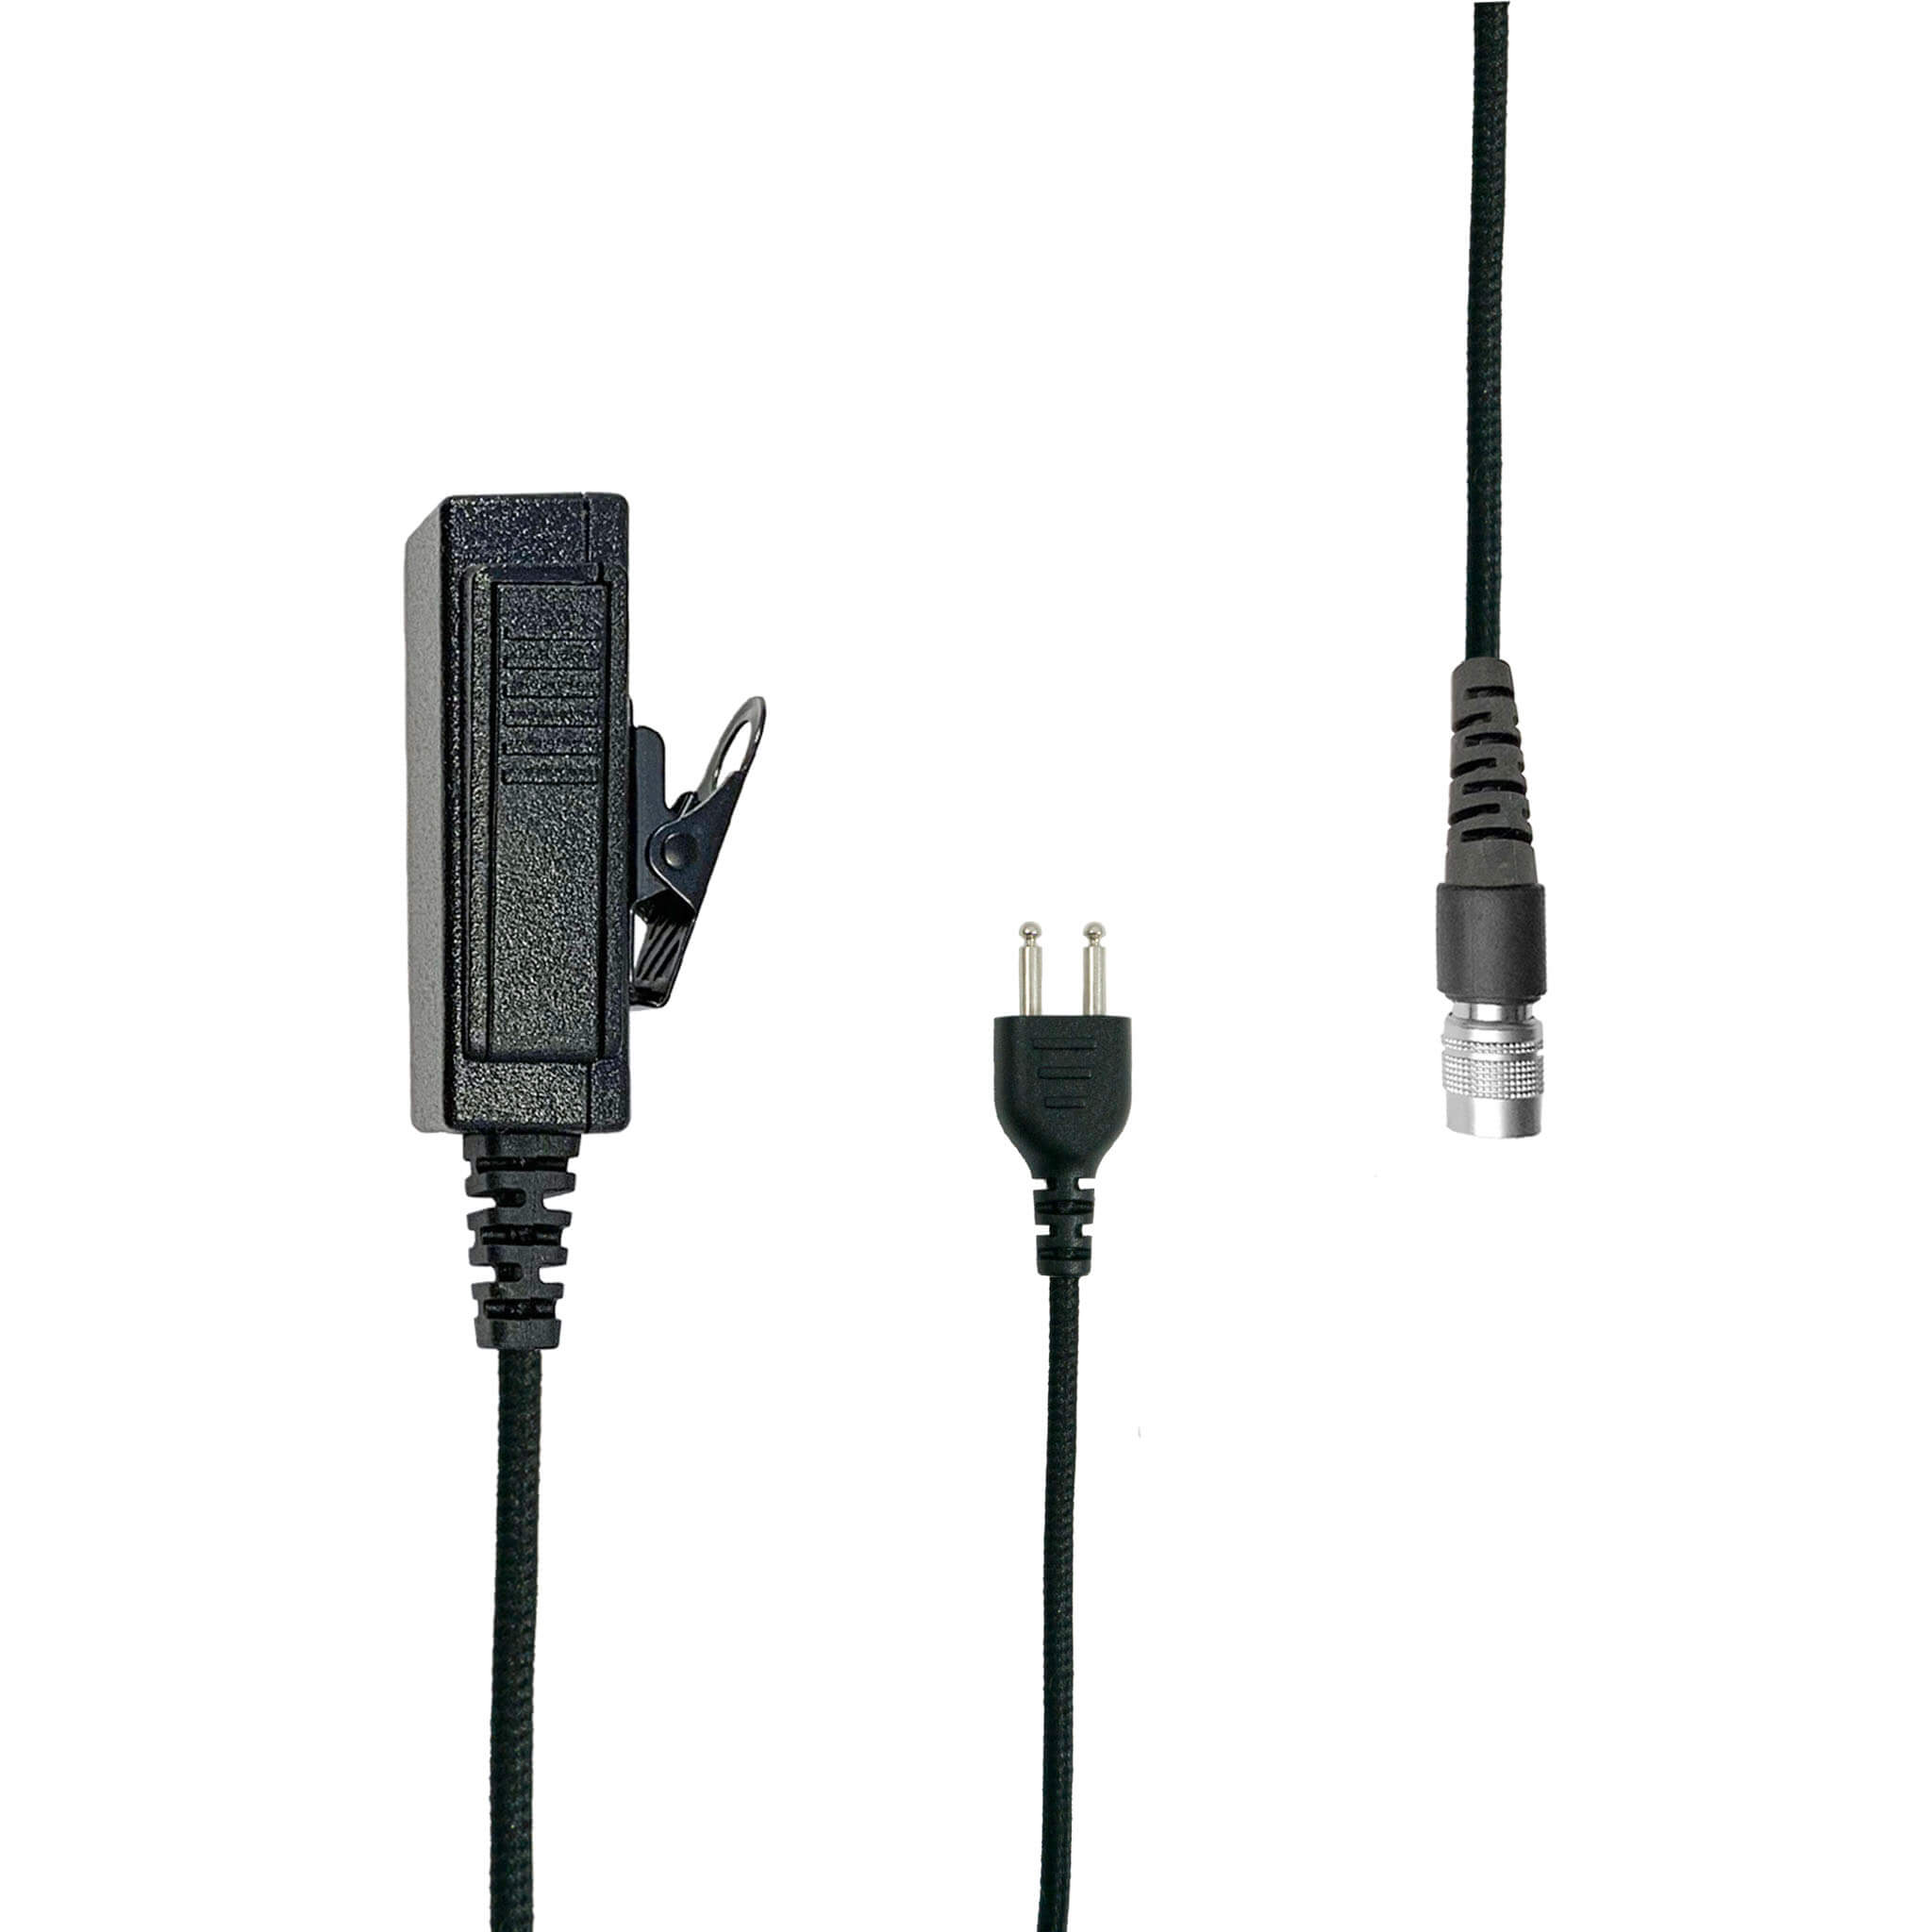 Mic Kit w/ Quick Disconnect (Hirose) Connector & 2 Wire Braided Cable for  Hearing Protection(Ear Pro) Headsets: 3M, Howard Leight, Pro Ears, MSA 